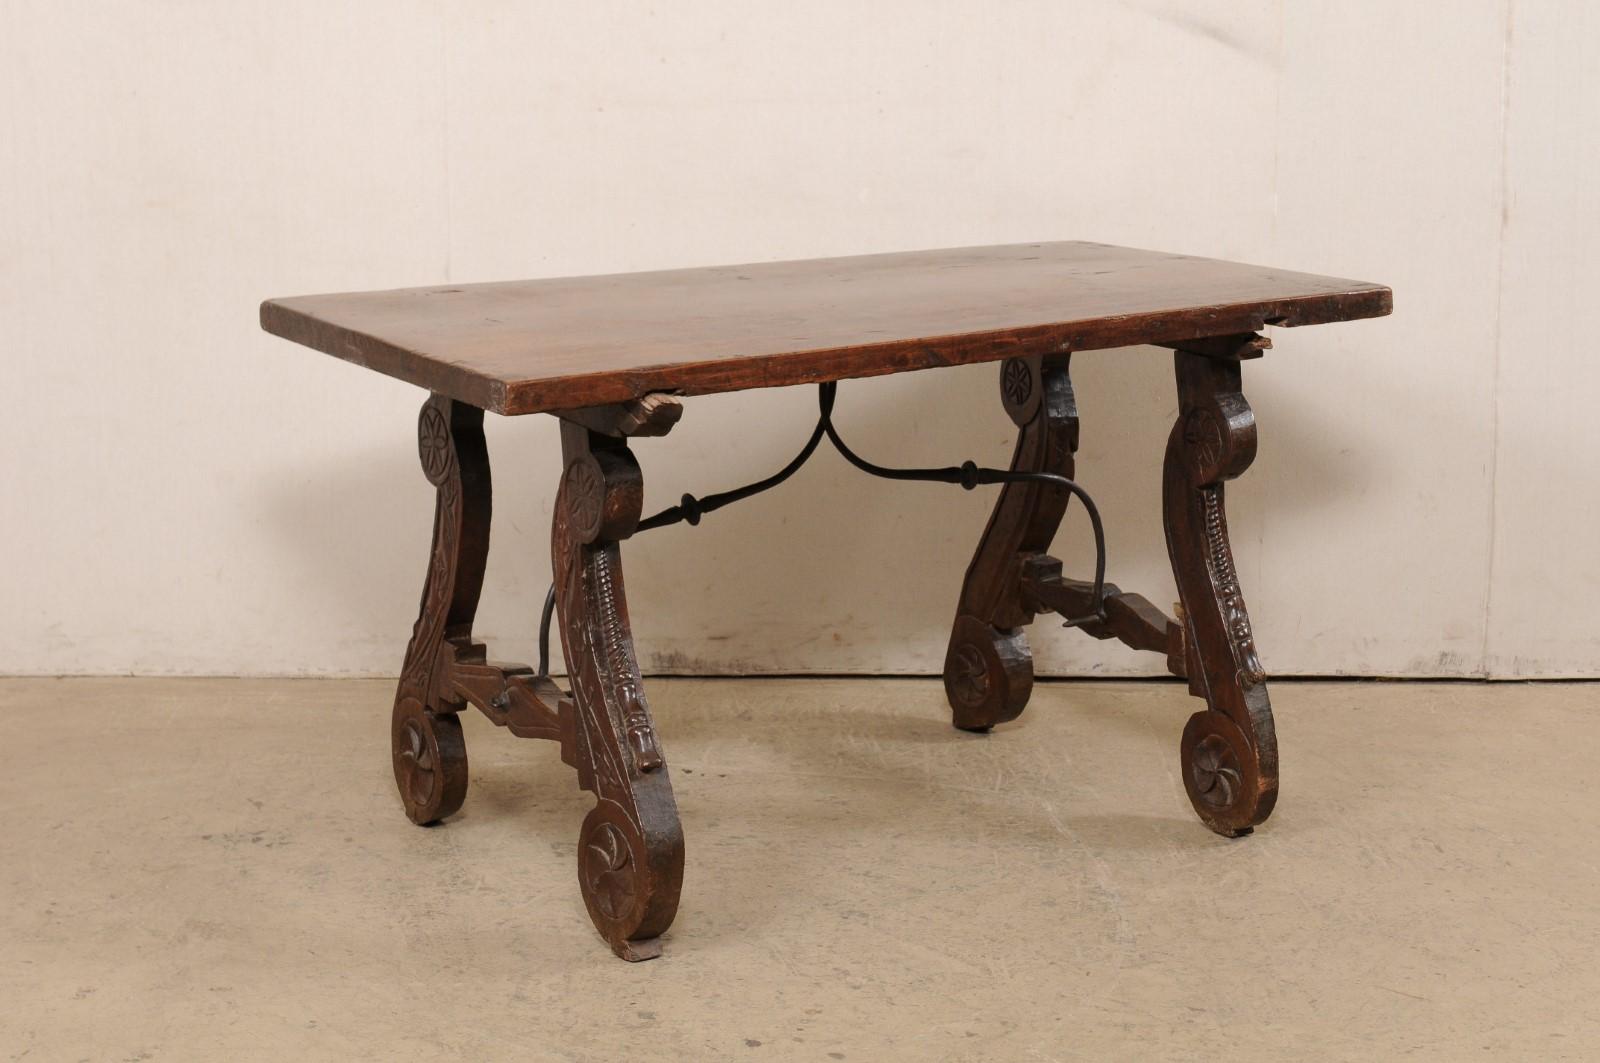 A Spanish walnut wood stretcher table, with beautifully carved lyre legs, from the 18th century. This antique table from Spain features a rectangular-shaped top which is comprised of a single board, raised upon a pair of scrolling lyre-legs with